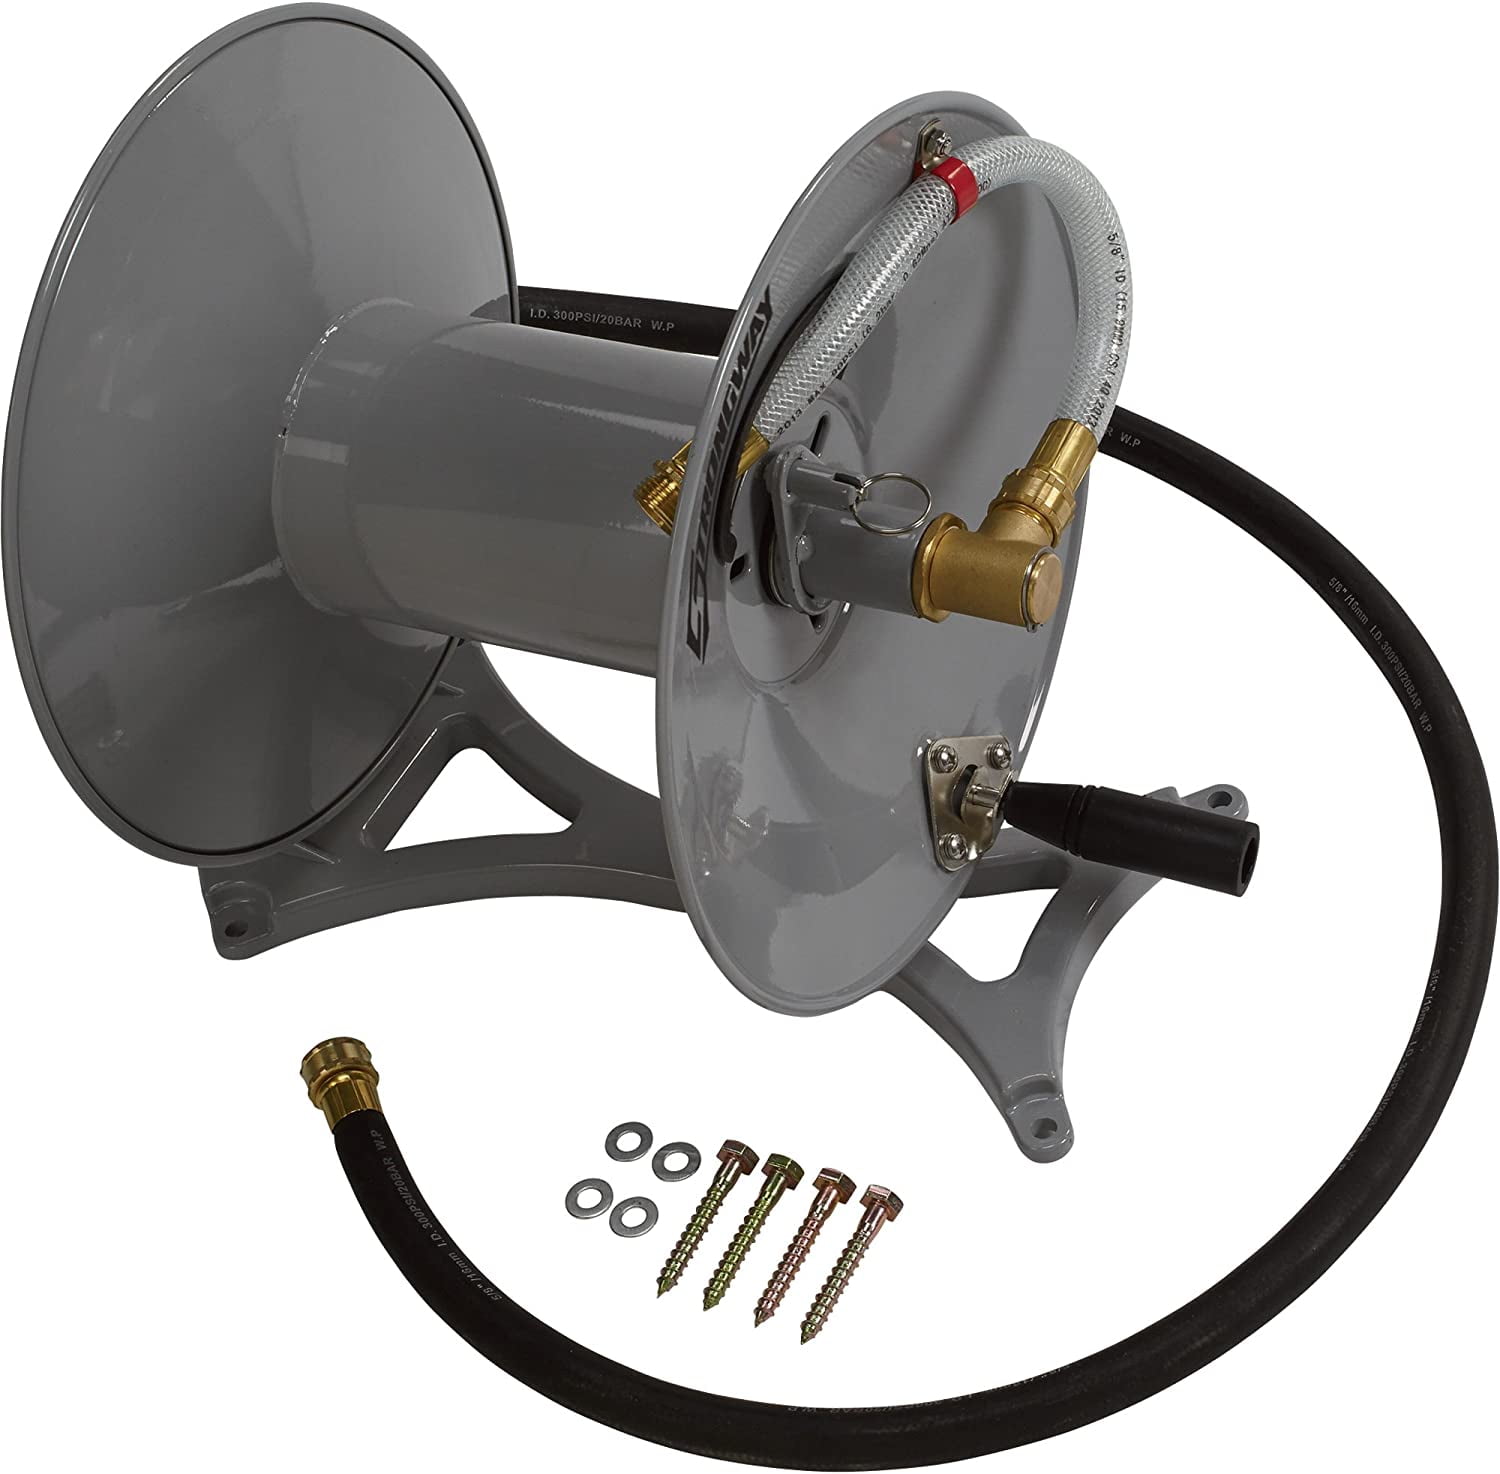 Strongway Parallel or Perpendicular Wall-Mount Garden Hose Reel - Holds  150ft. x 5/8in. Hose 